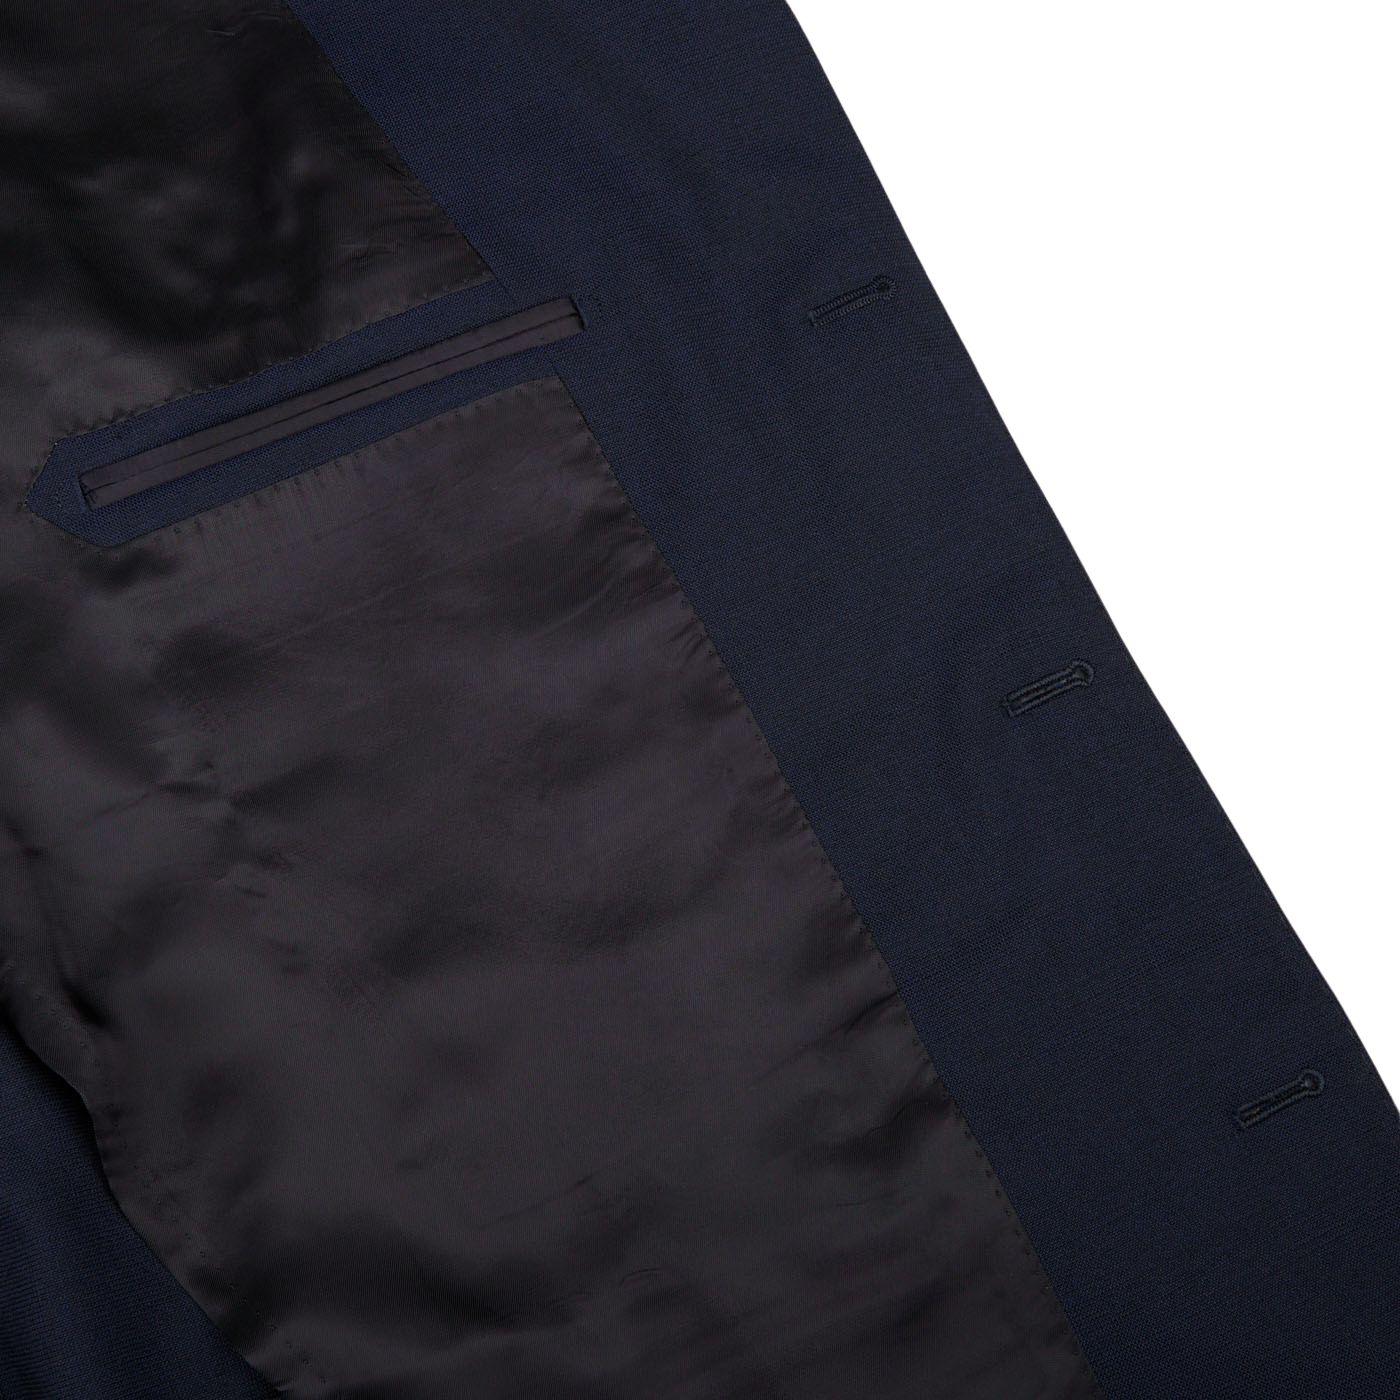 Close-up view of a Ring Jacket Navy Blue High Twist Wool Suit with detailed stitching and a pocket on the inside lining.